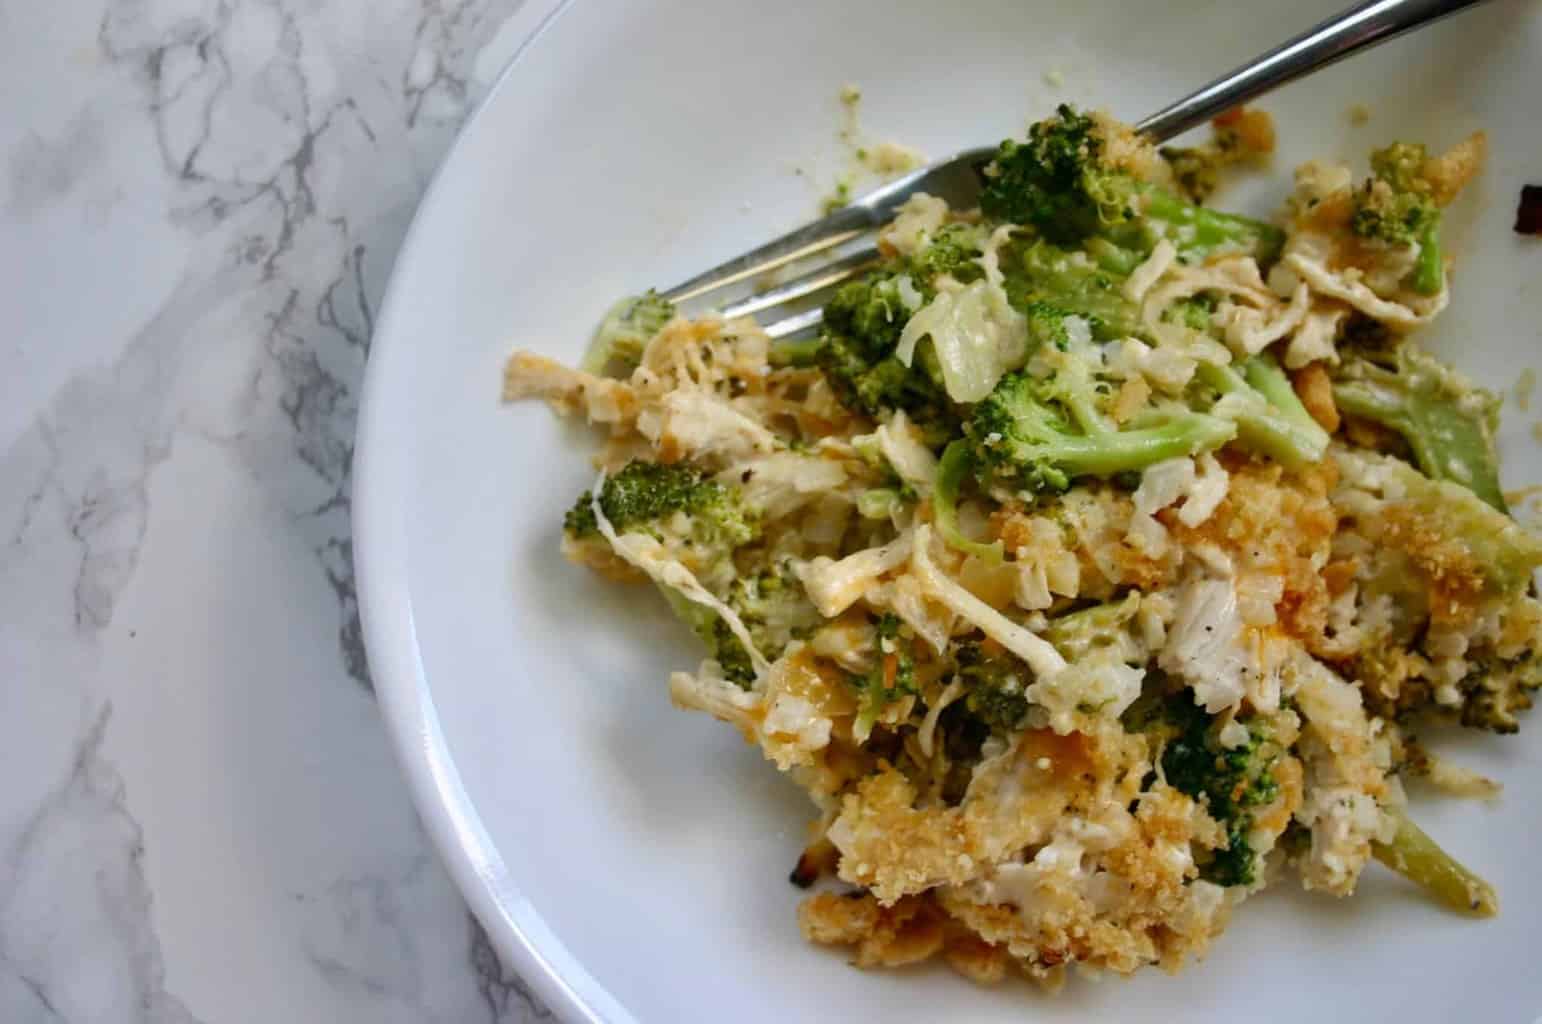 Need low carb dinner ideas? Add this low carb chicken broccoli casserole to your list of healthy dinner recipes!